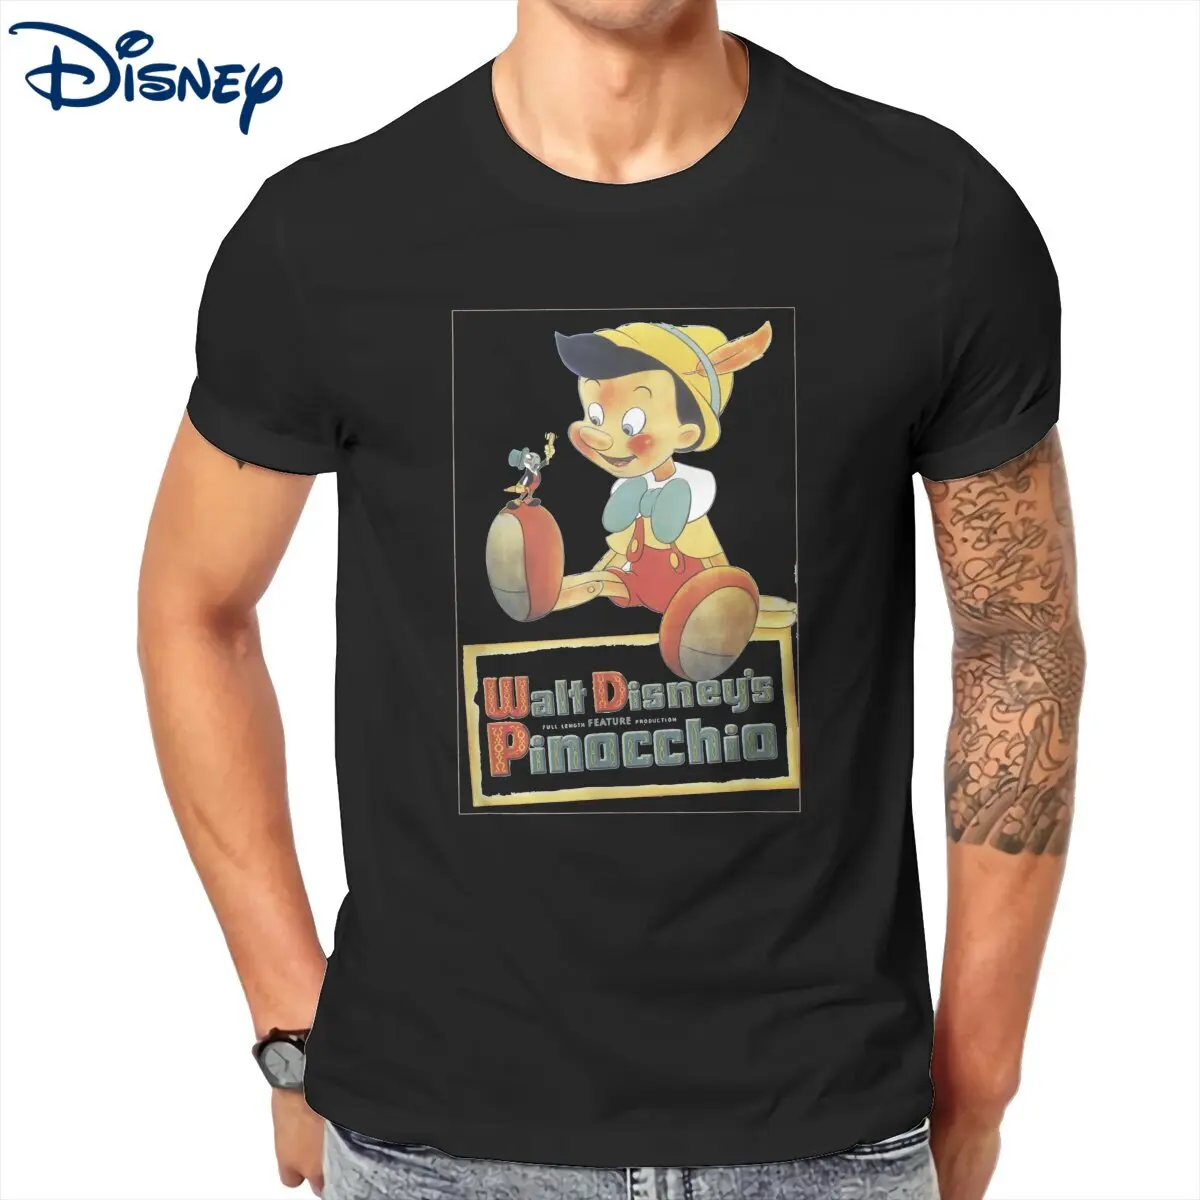 

Pinocchio Vintage Guillermo T-Shirt for Men Novelty Cotton Tee Shirt Round Collar Short Sleeve Disney T Shirts Gift Clothing